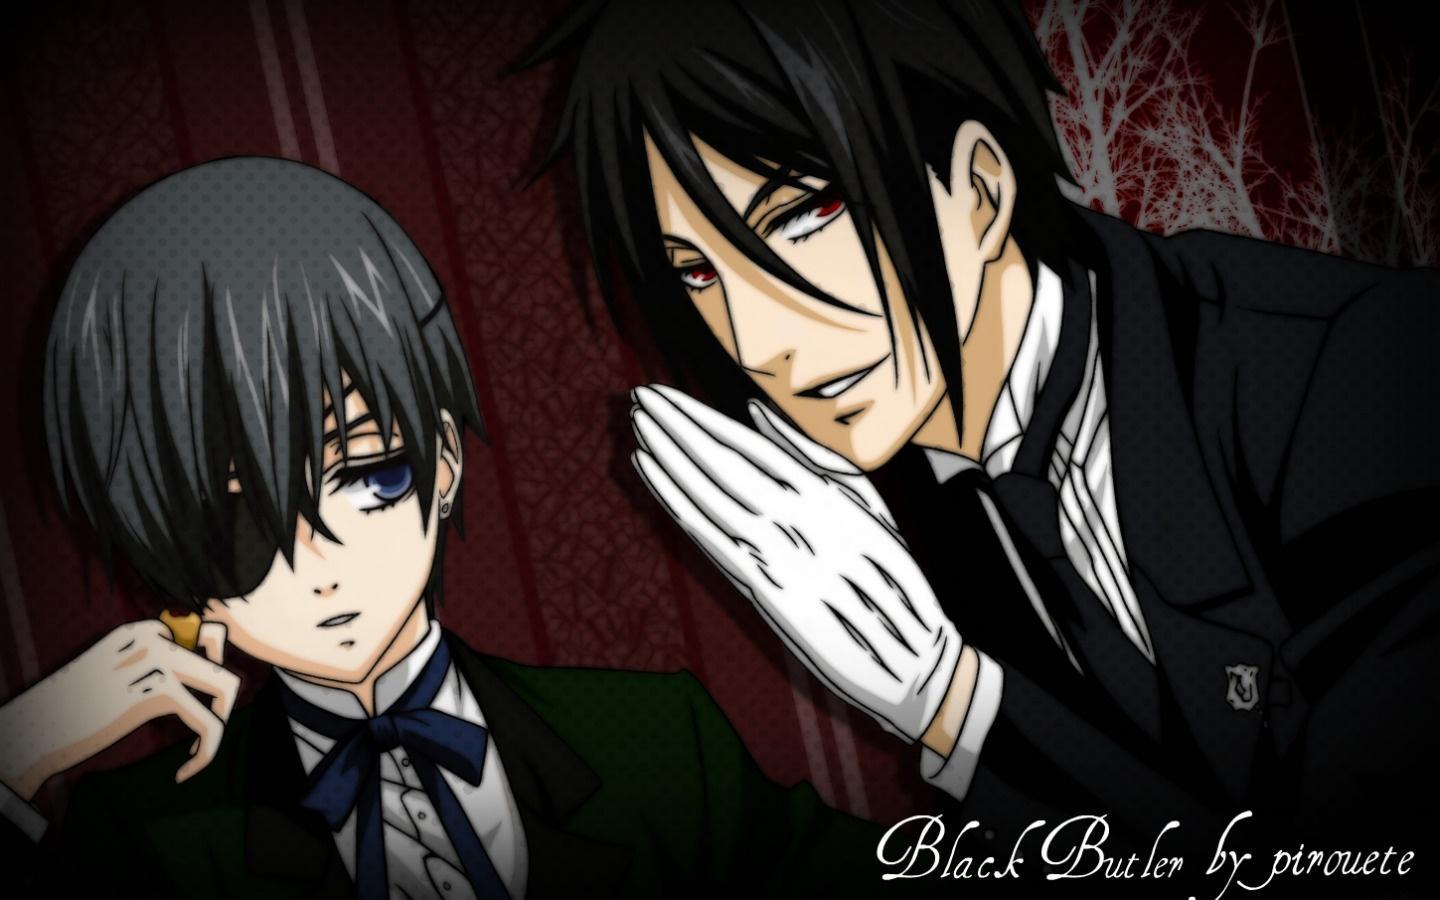 lion king chacters as black butler characters